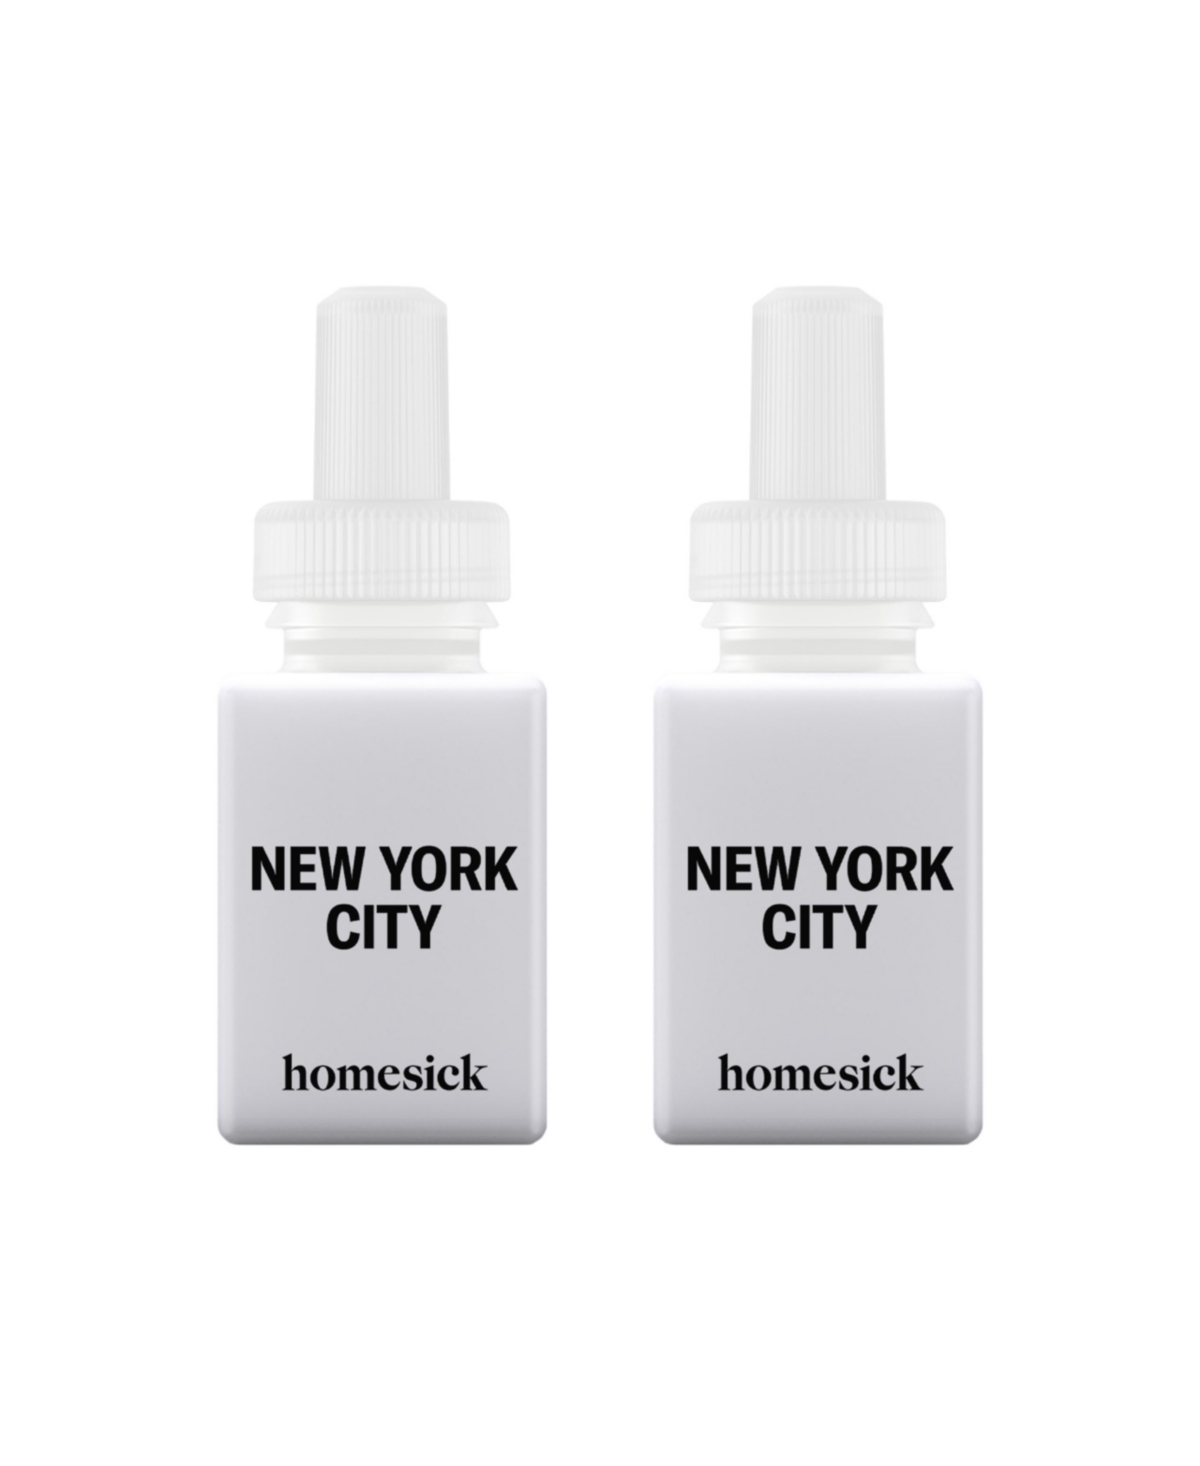 Homesick - New York City - Home Scent Refill - Smart Home Air Diffuser Fragrance - Up to 120-Hours of Luxury Fragrance per Refill - Clean & Safe